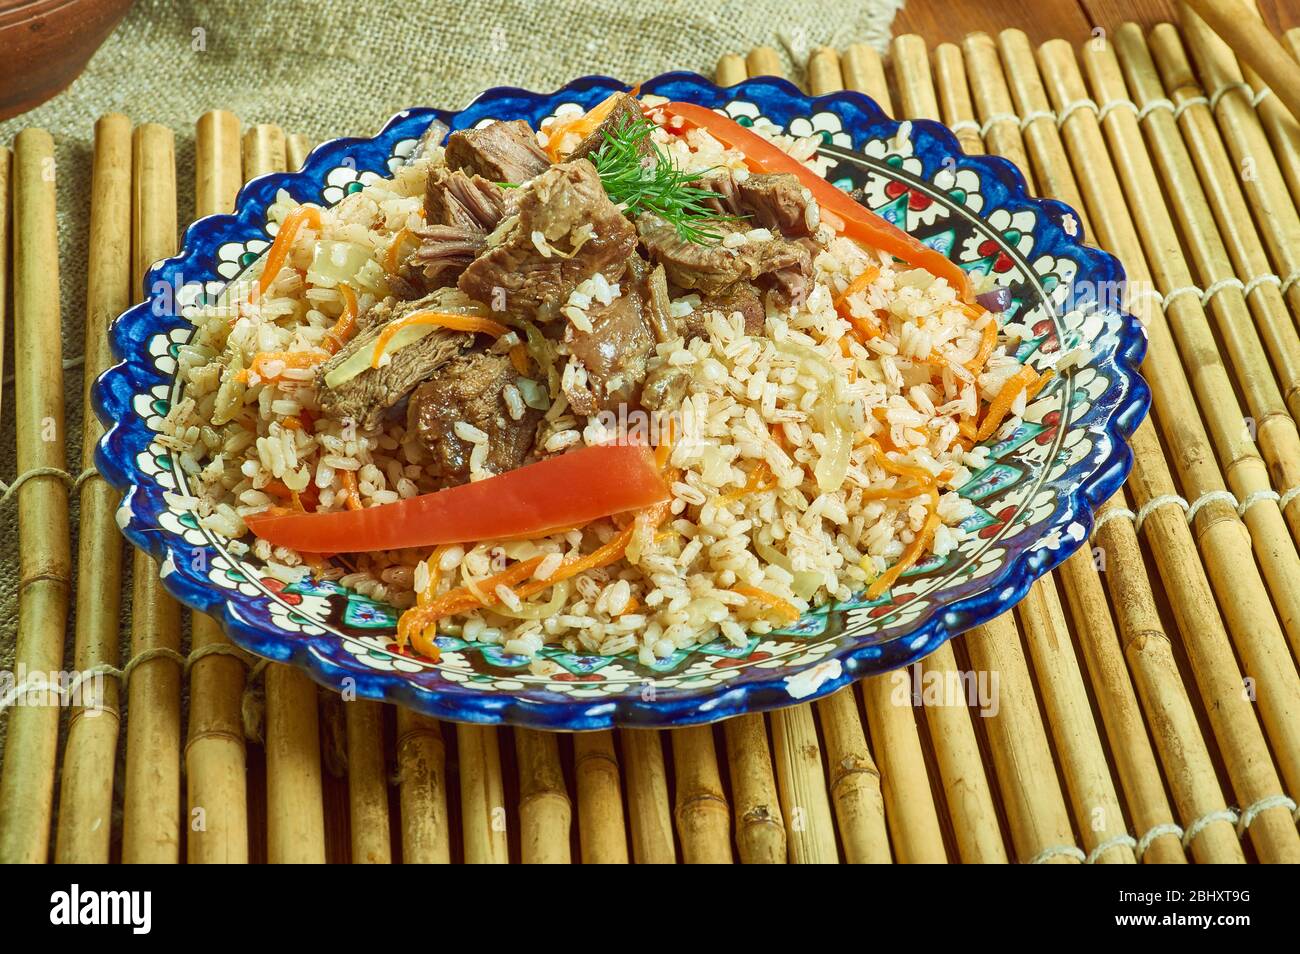 Chorezmskiy Uzbek plov Chalov, authentic rice and lamb dish for a party from the heart of Middle Asia Stock Photo